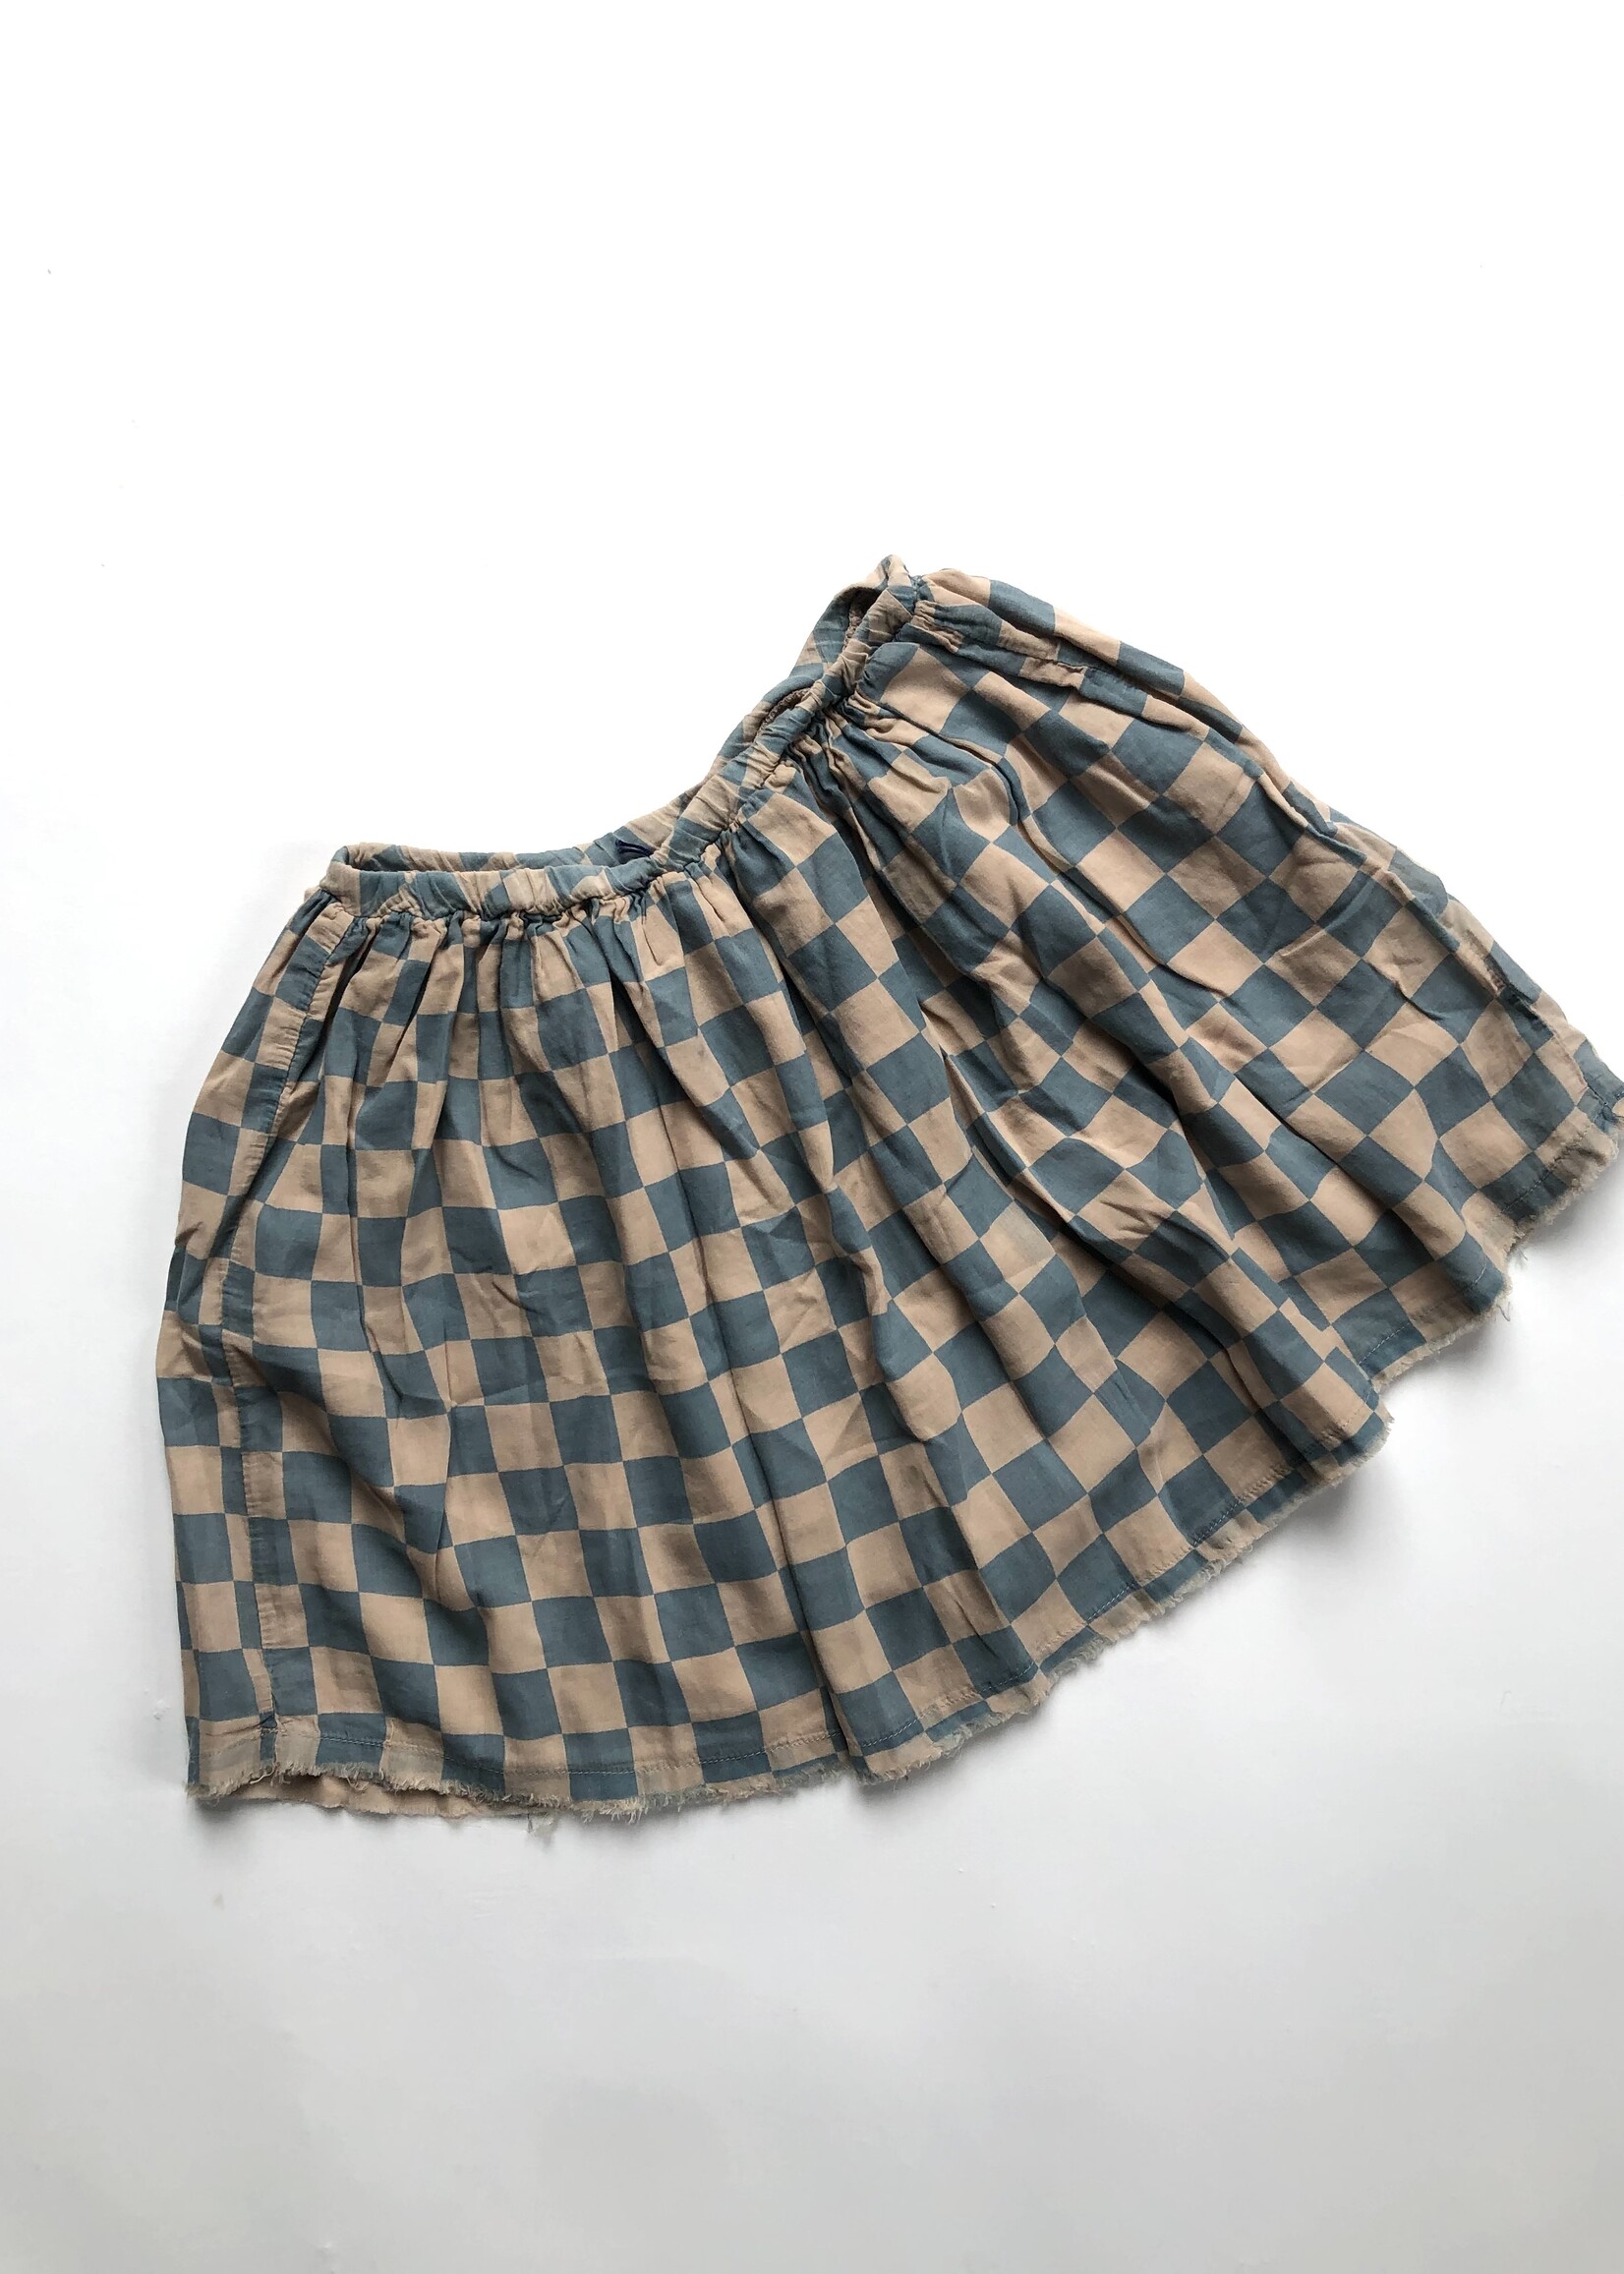 Long Live The Queen Light blue check skirt 10y